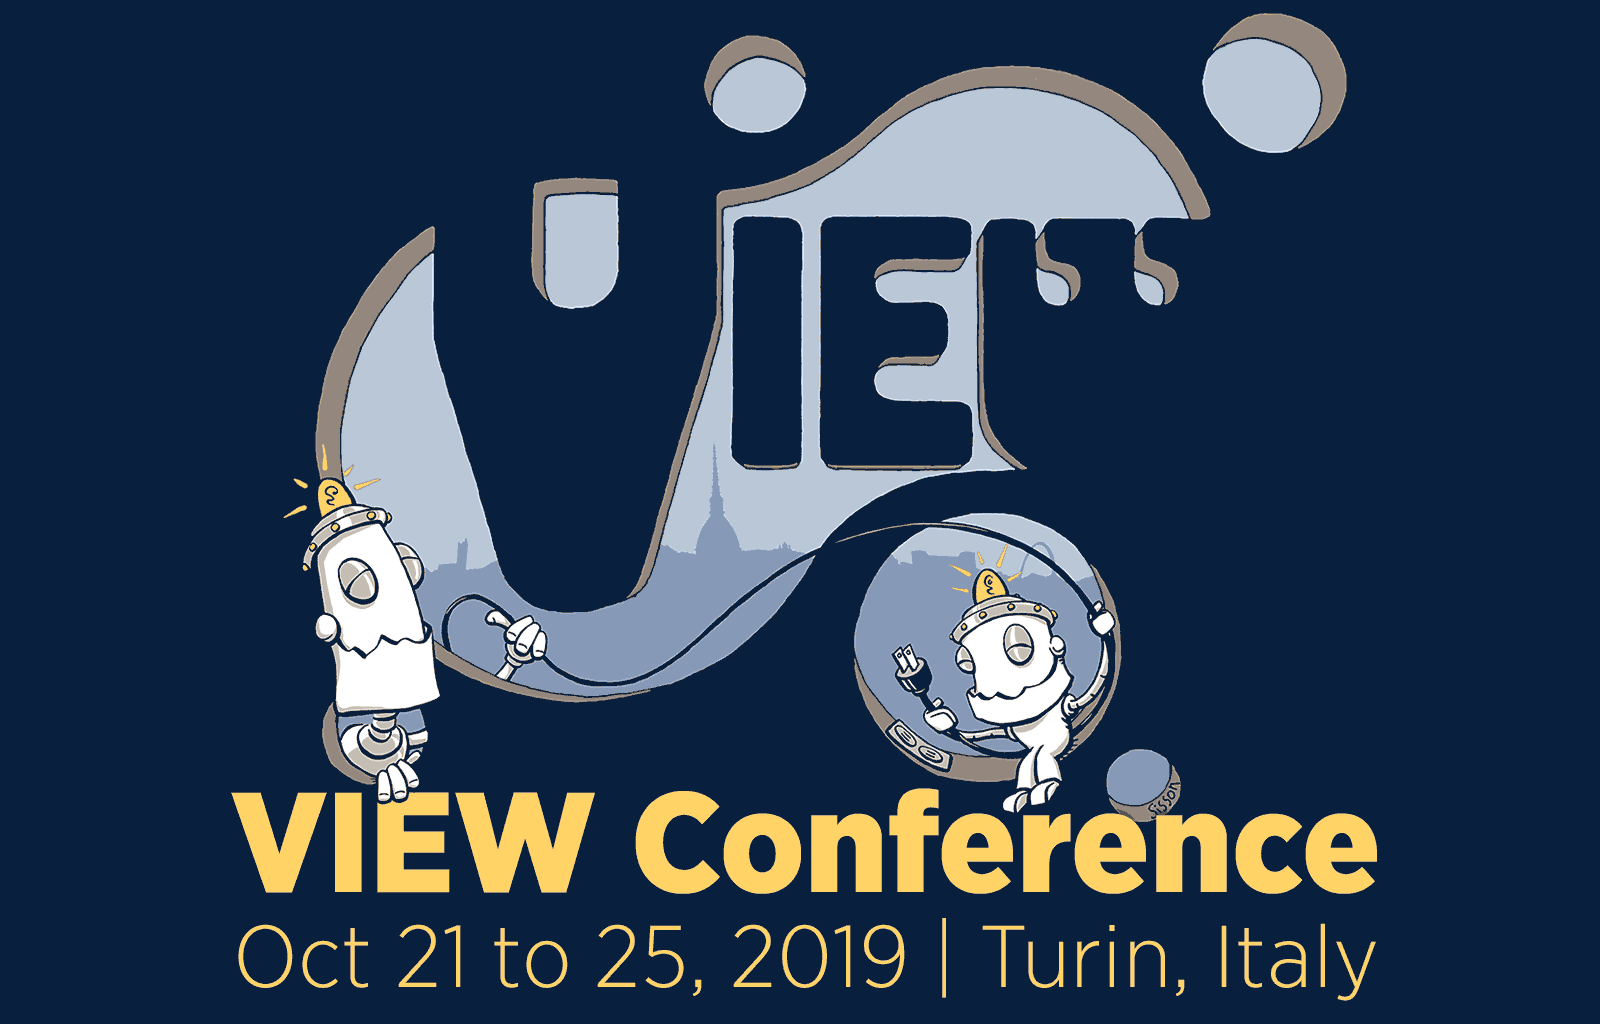 20th International VFX Computer Graphics Conference 21-25 Oct. 2019 Turin, Italy